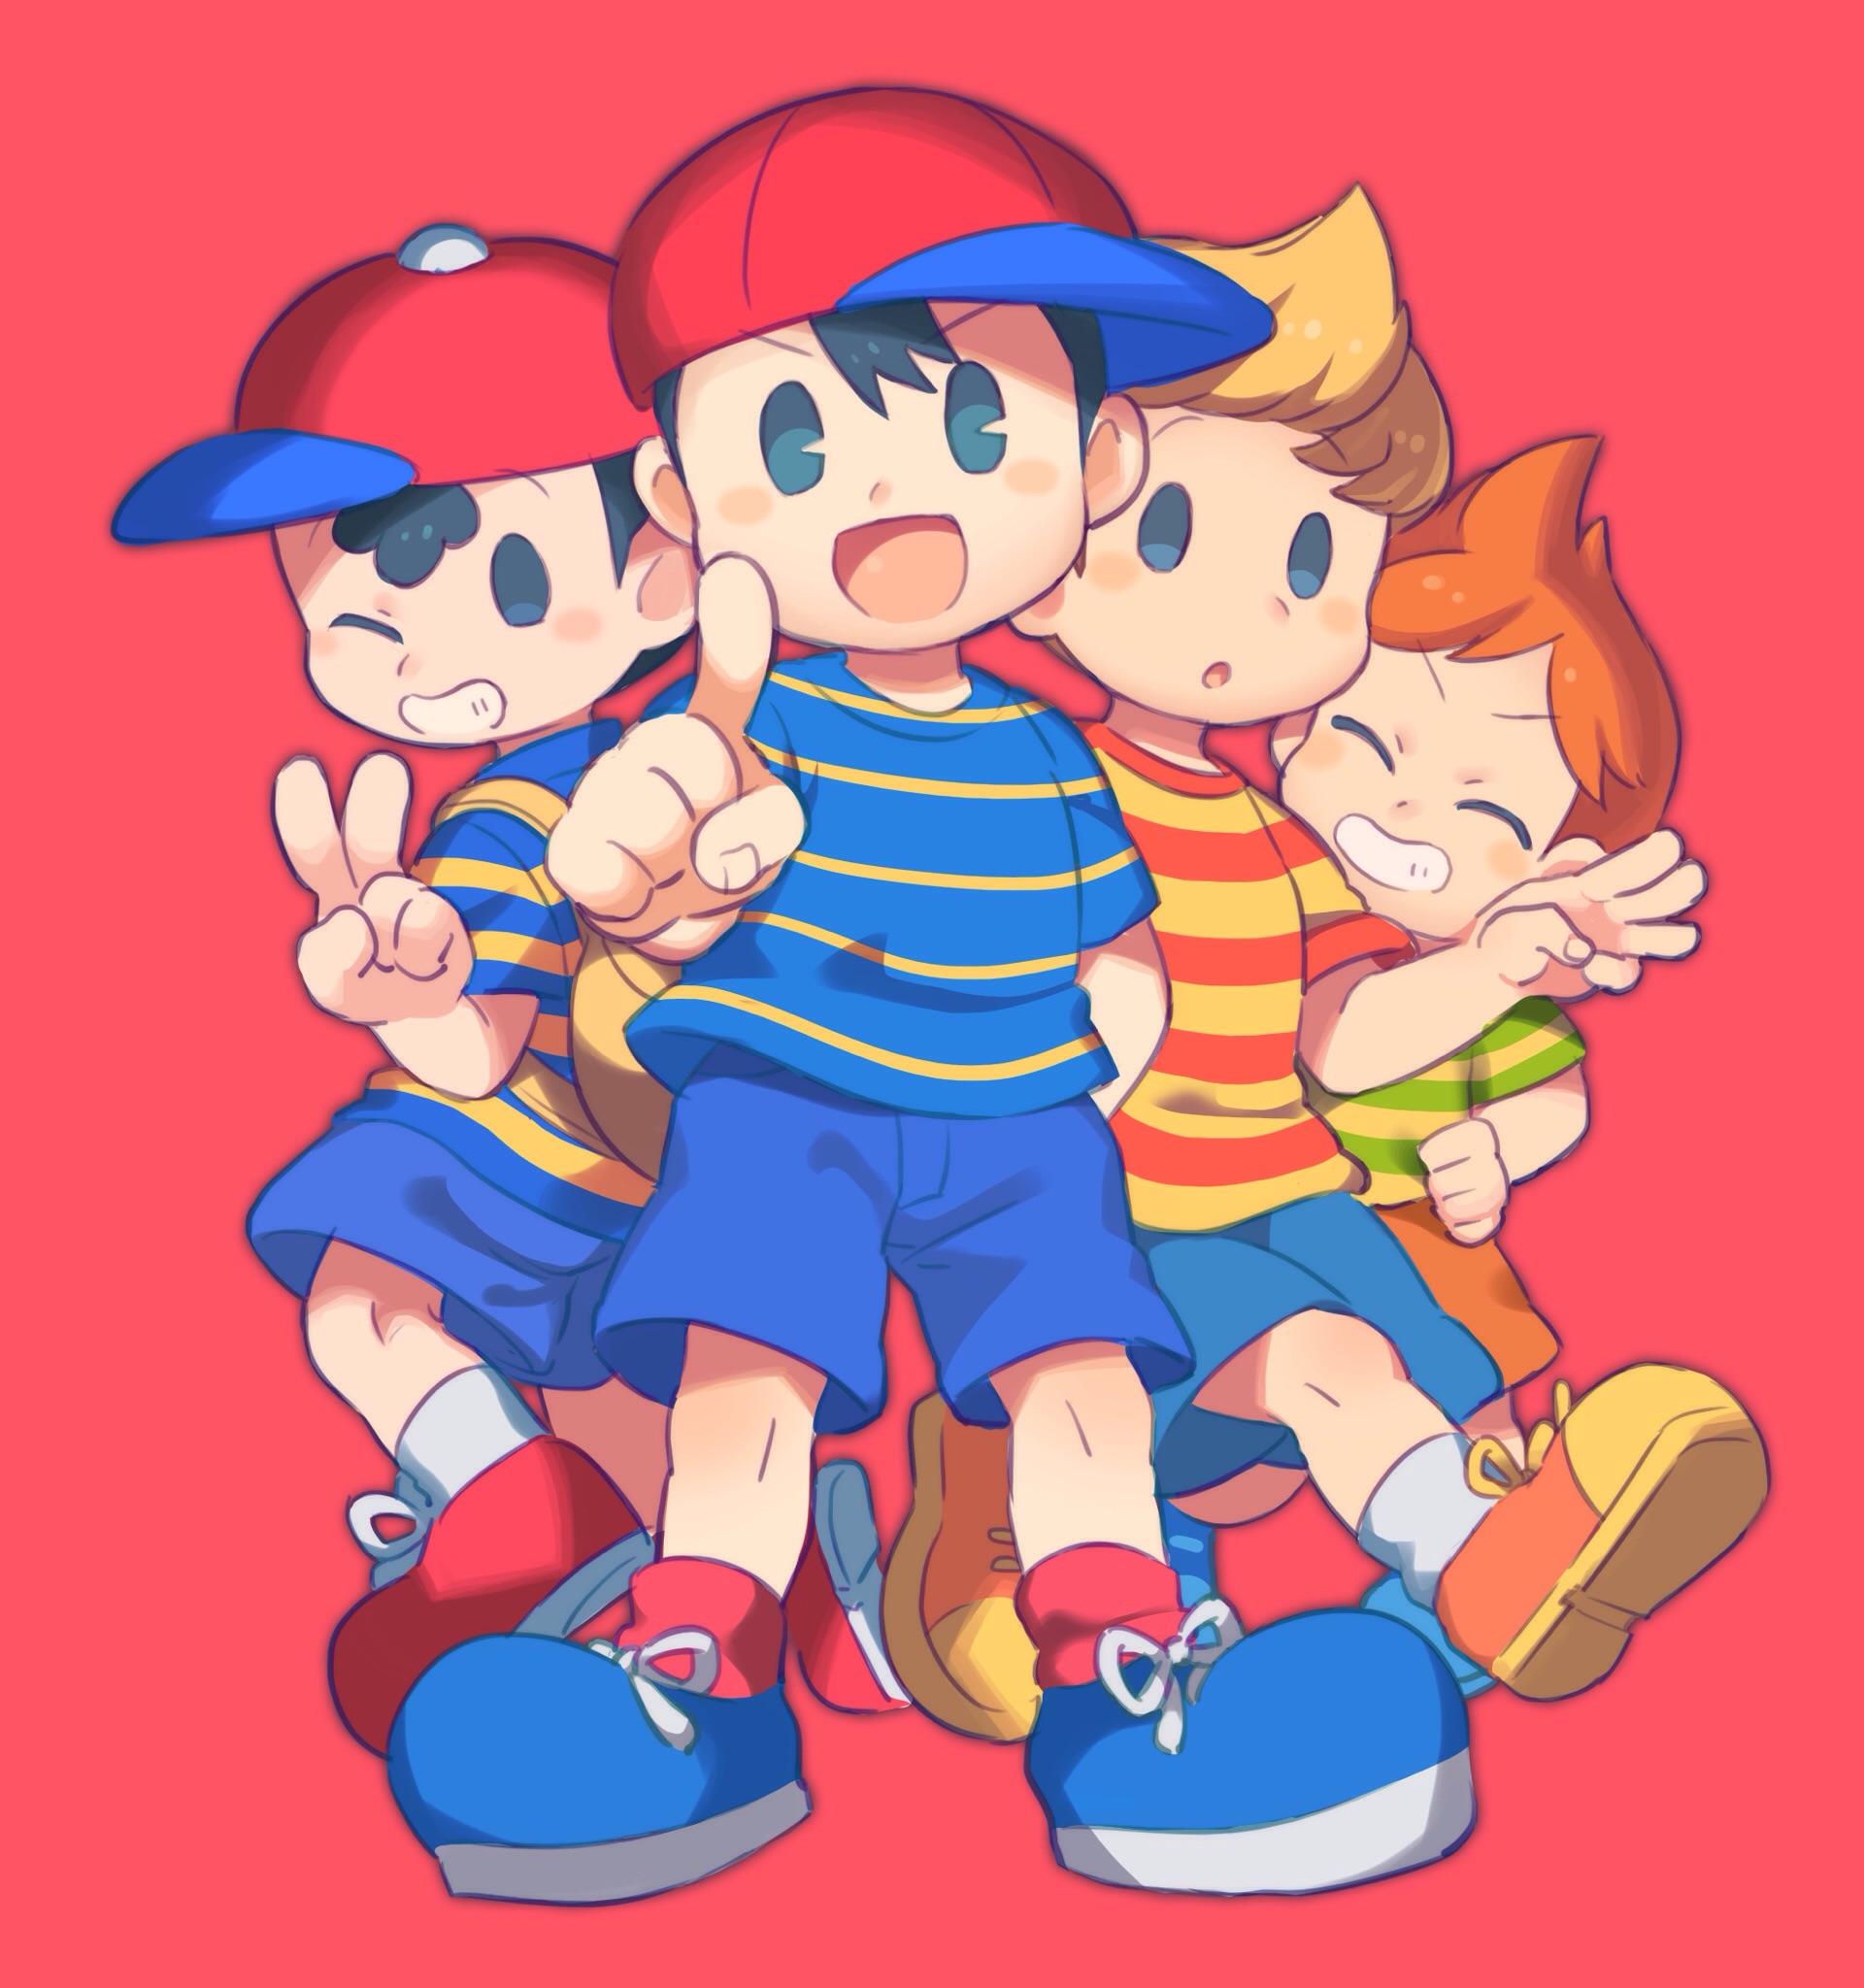 Mother 1 game. Earthbound. Earthbound 2. Mother Earthbound. Earthbound 1.